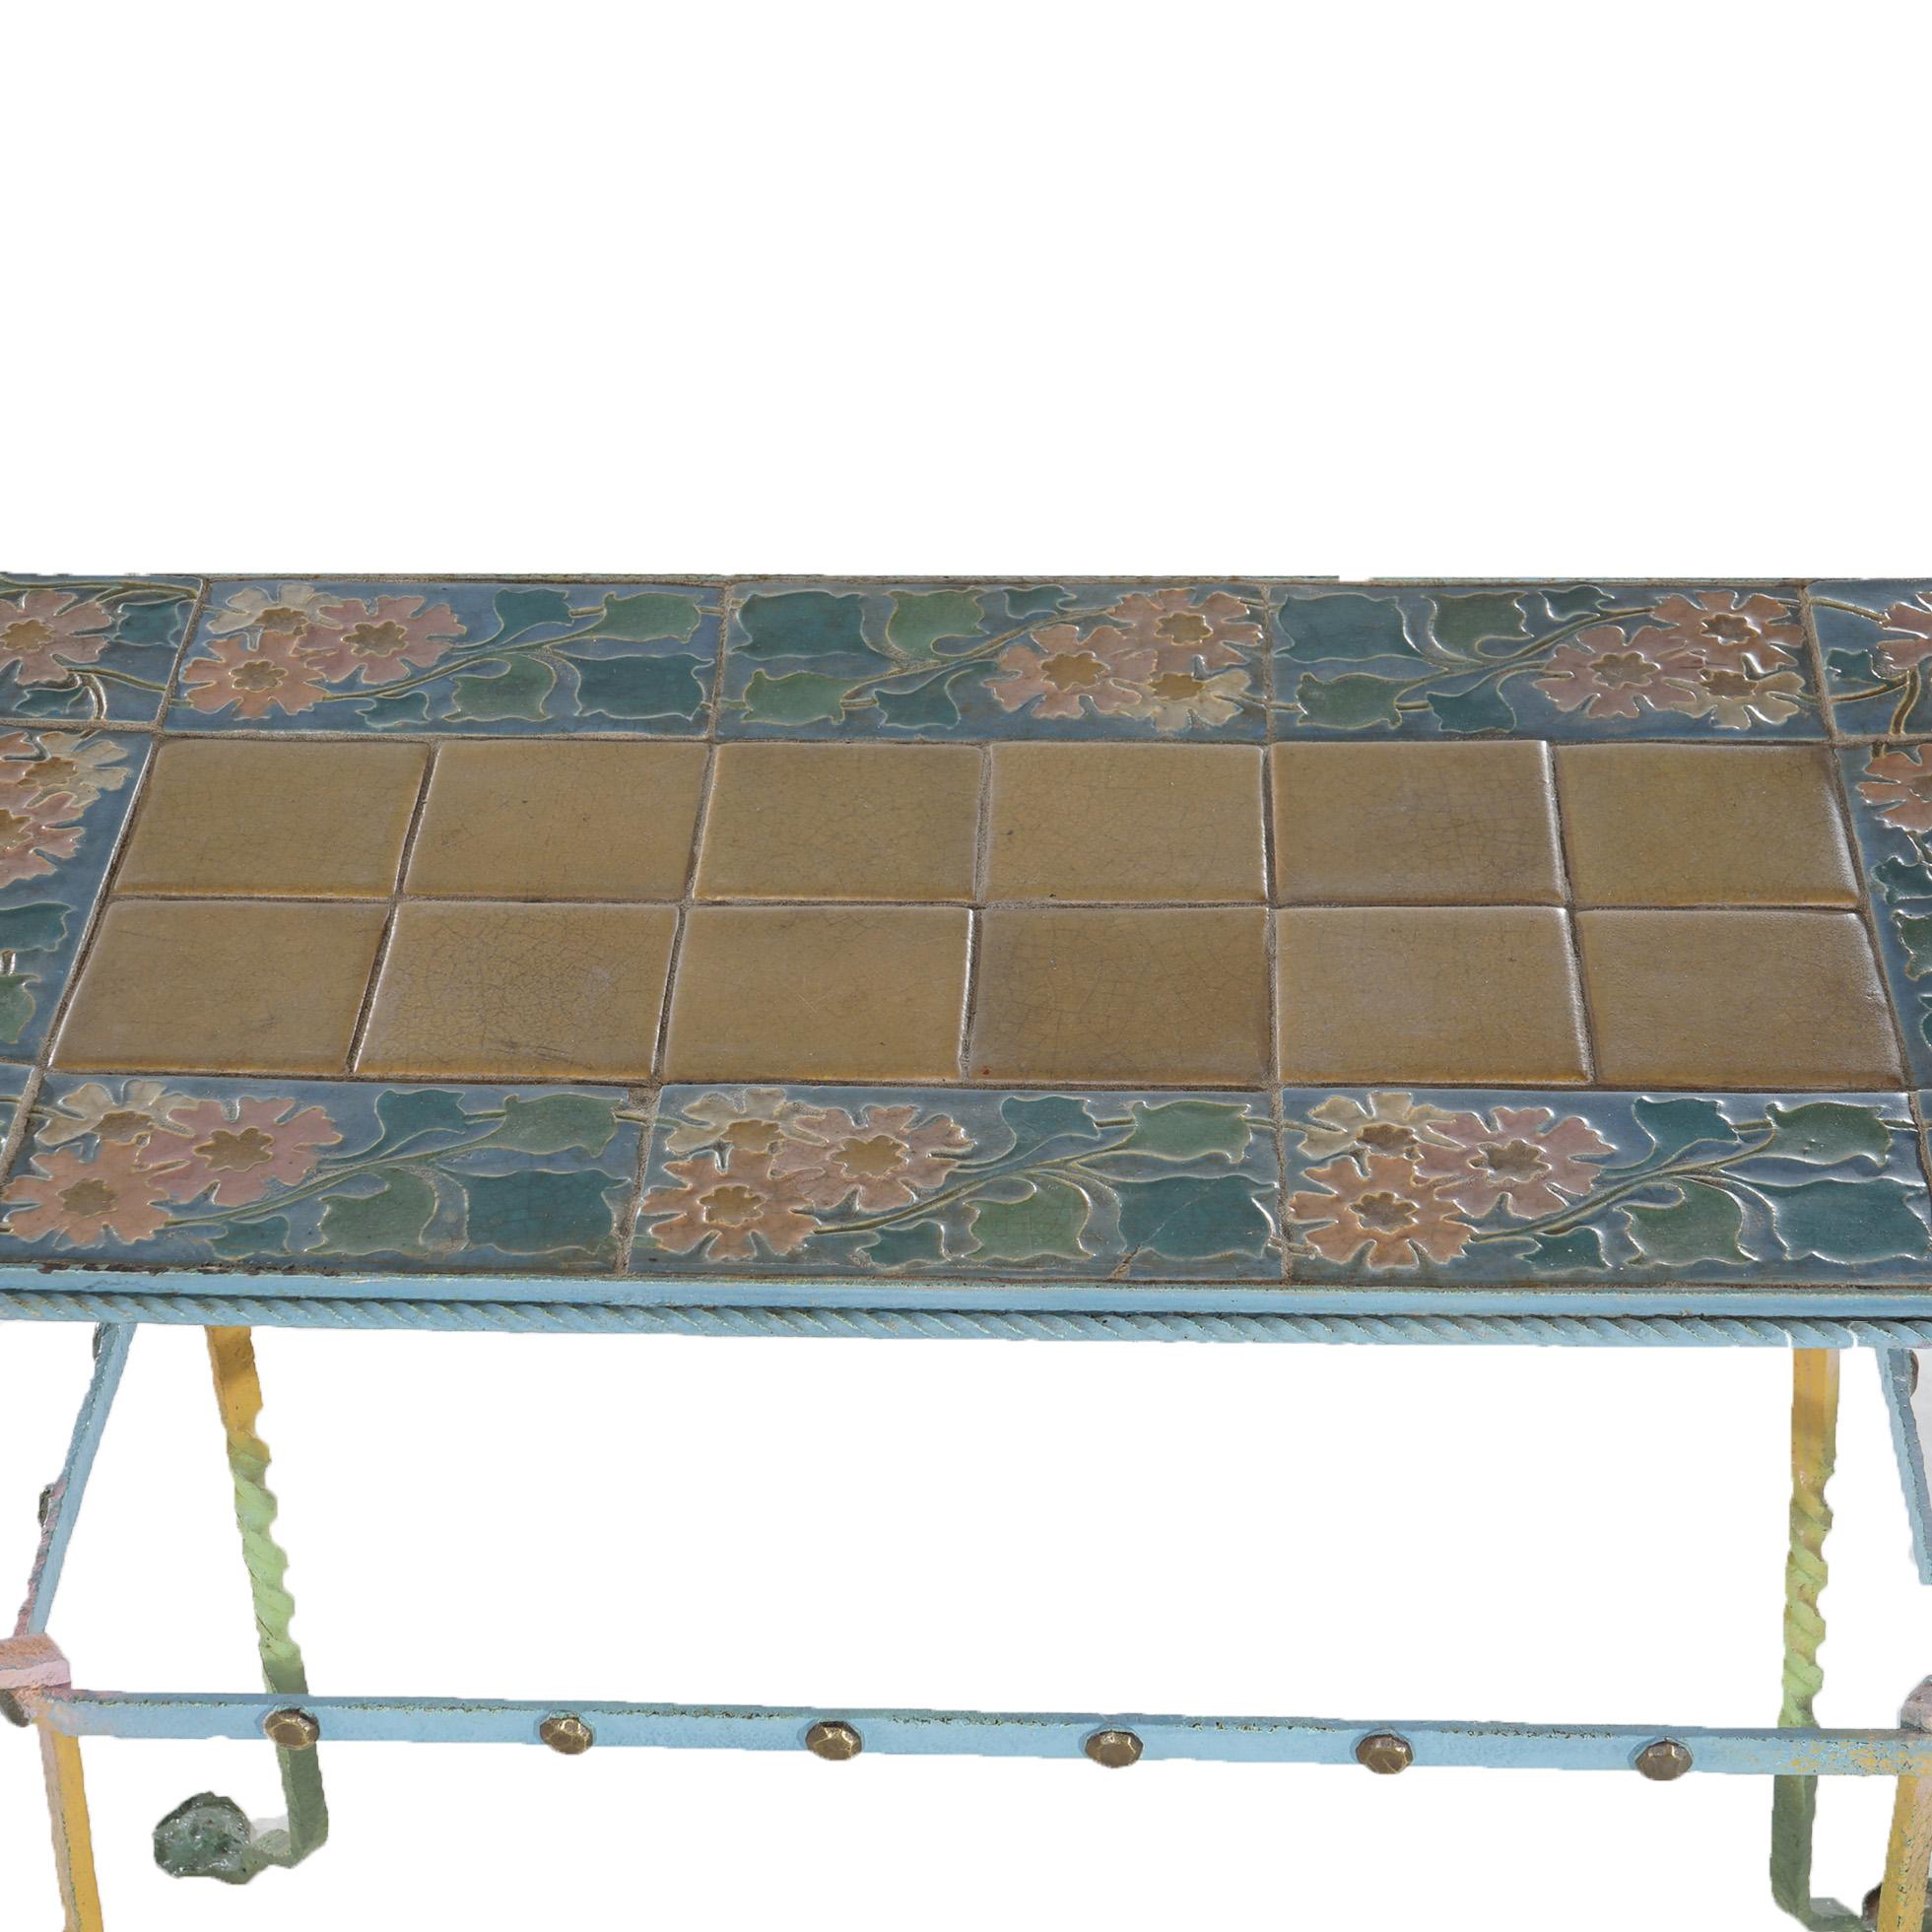 Antique Arts & Crafts Table with Floral Rookwood or Grueby Pottery Tile Top over Wrought Iron Base with Twisted Legs Having Foliate Elements and Stylized paw Feet, C1910

Measures- 31.5''H x 35''W x 20''D